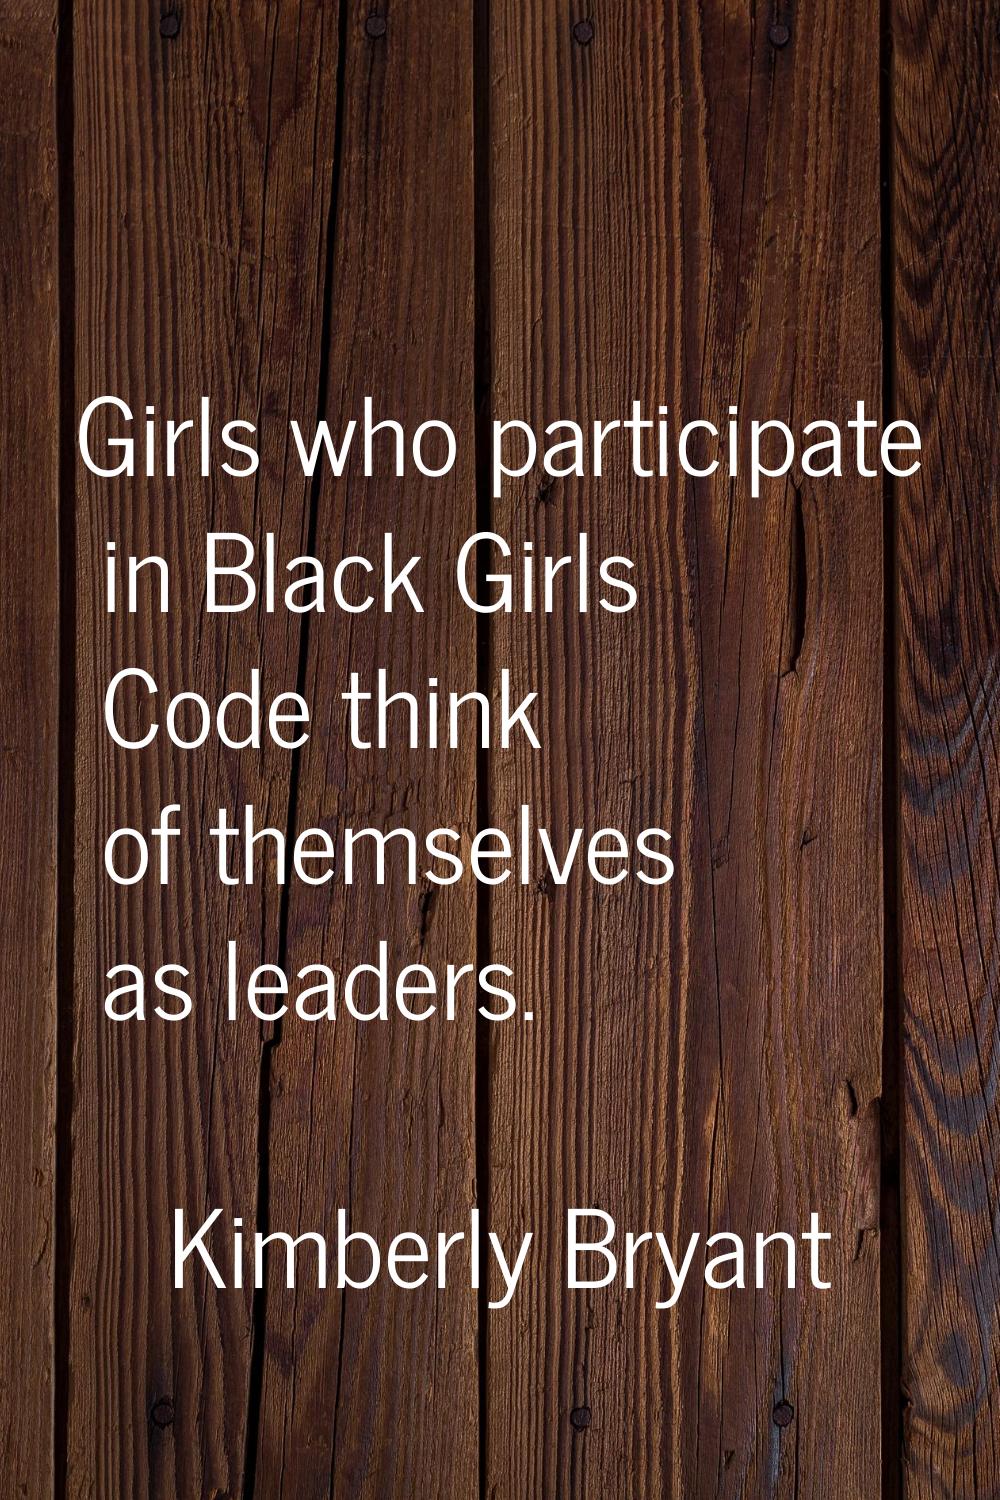 Girls who participate in Black Girls Code think of themselves as leaders.